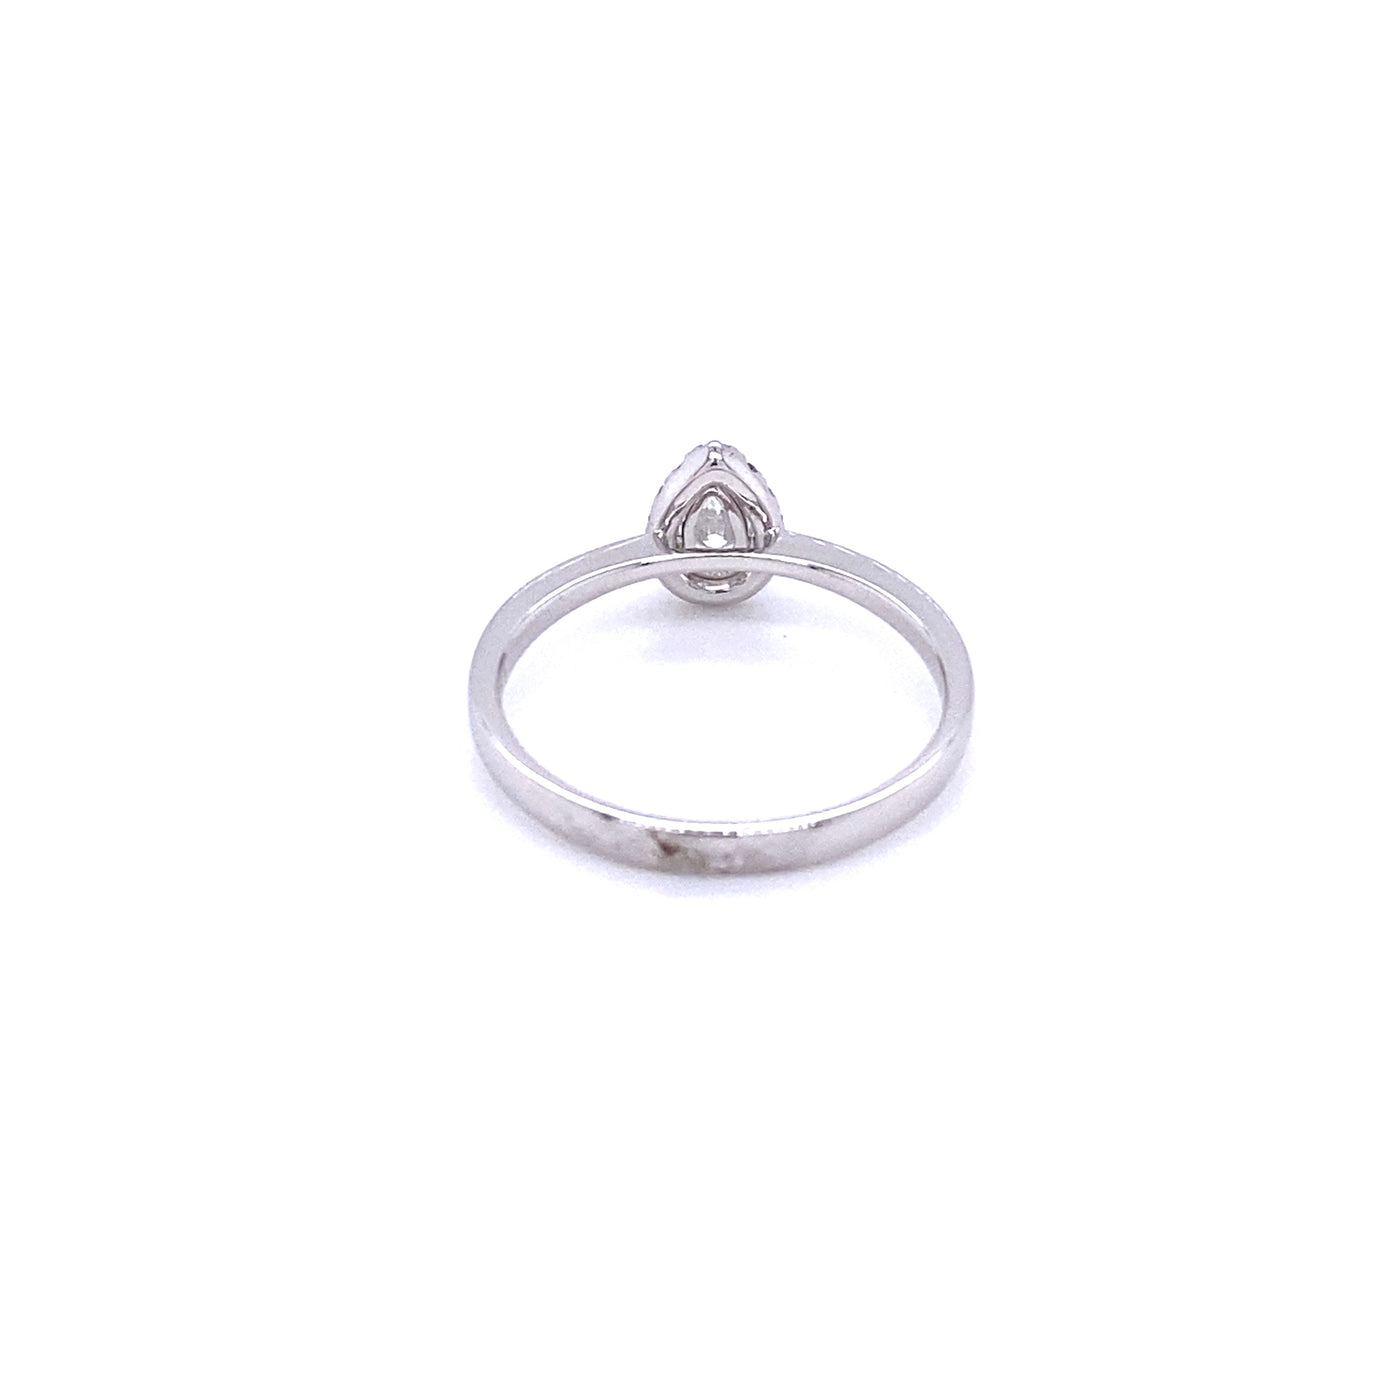 Solitaire Pear Diamond Halo Ring